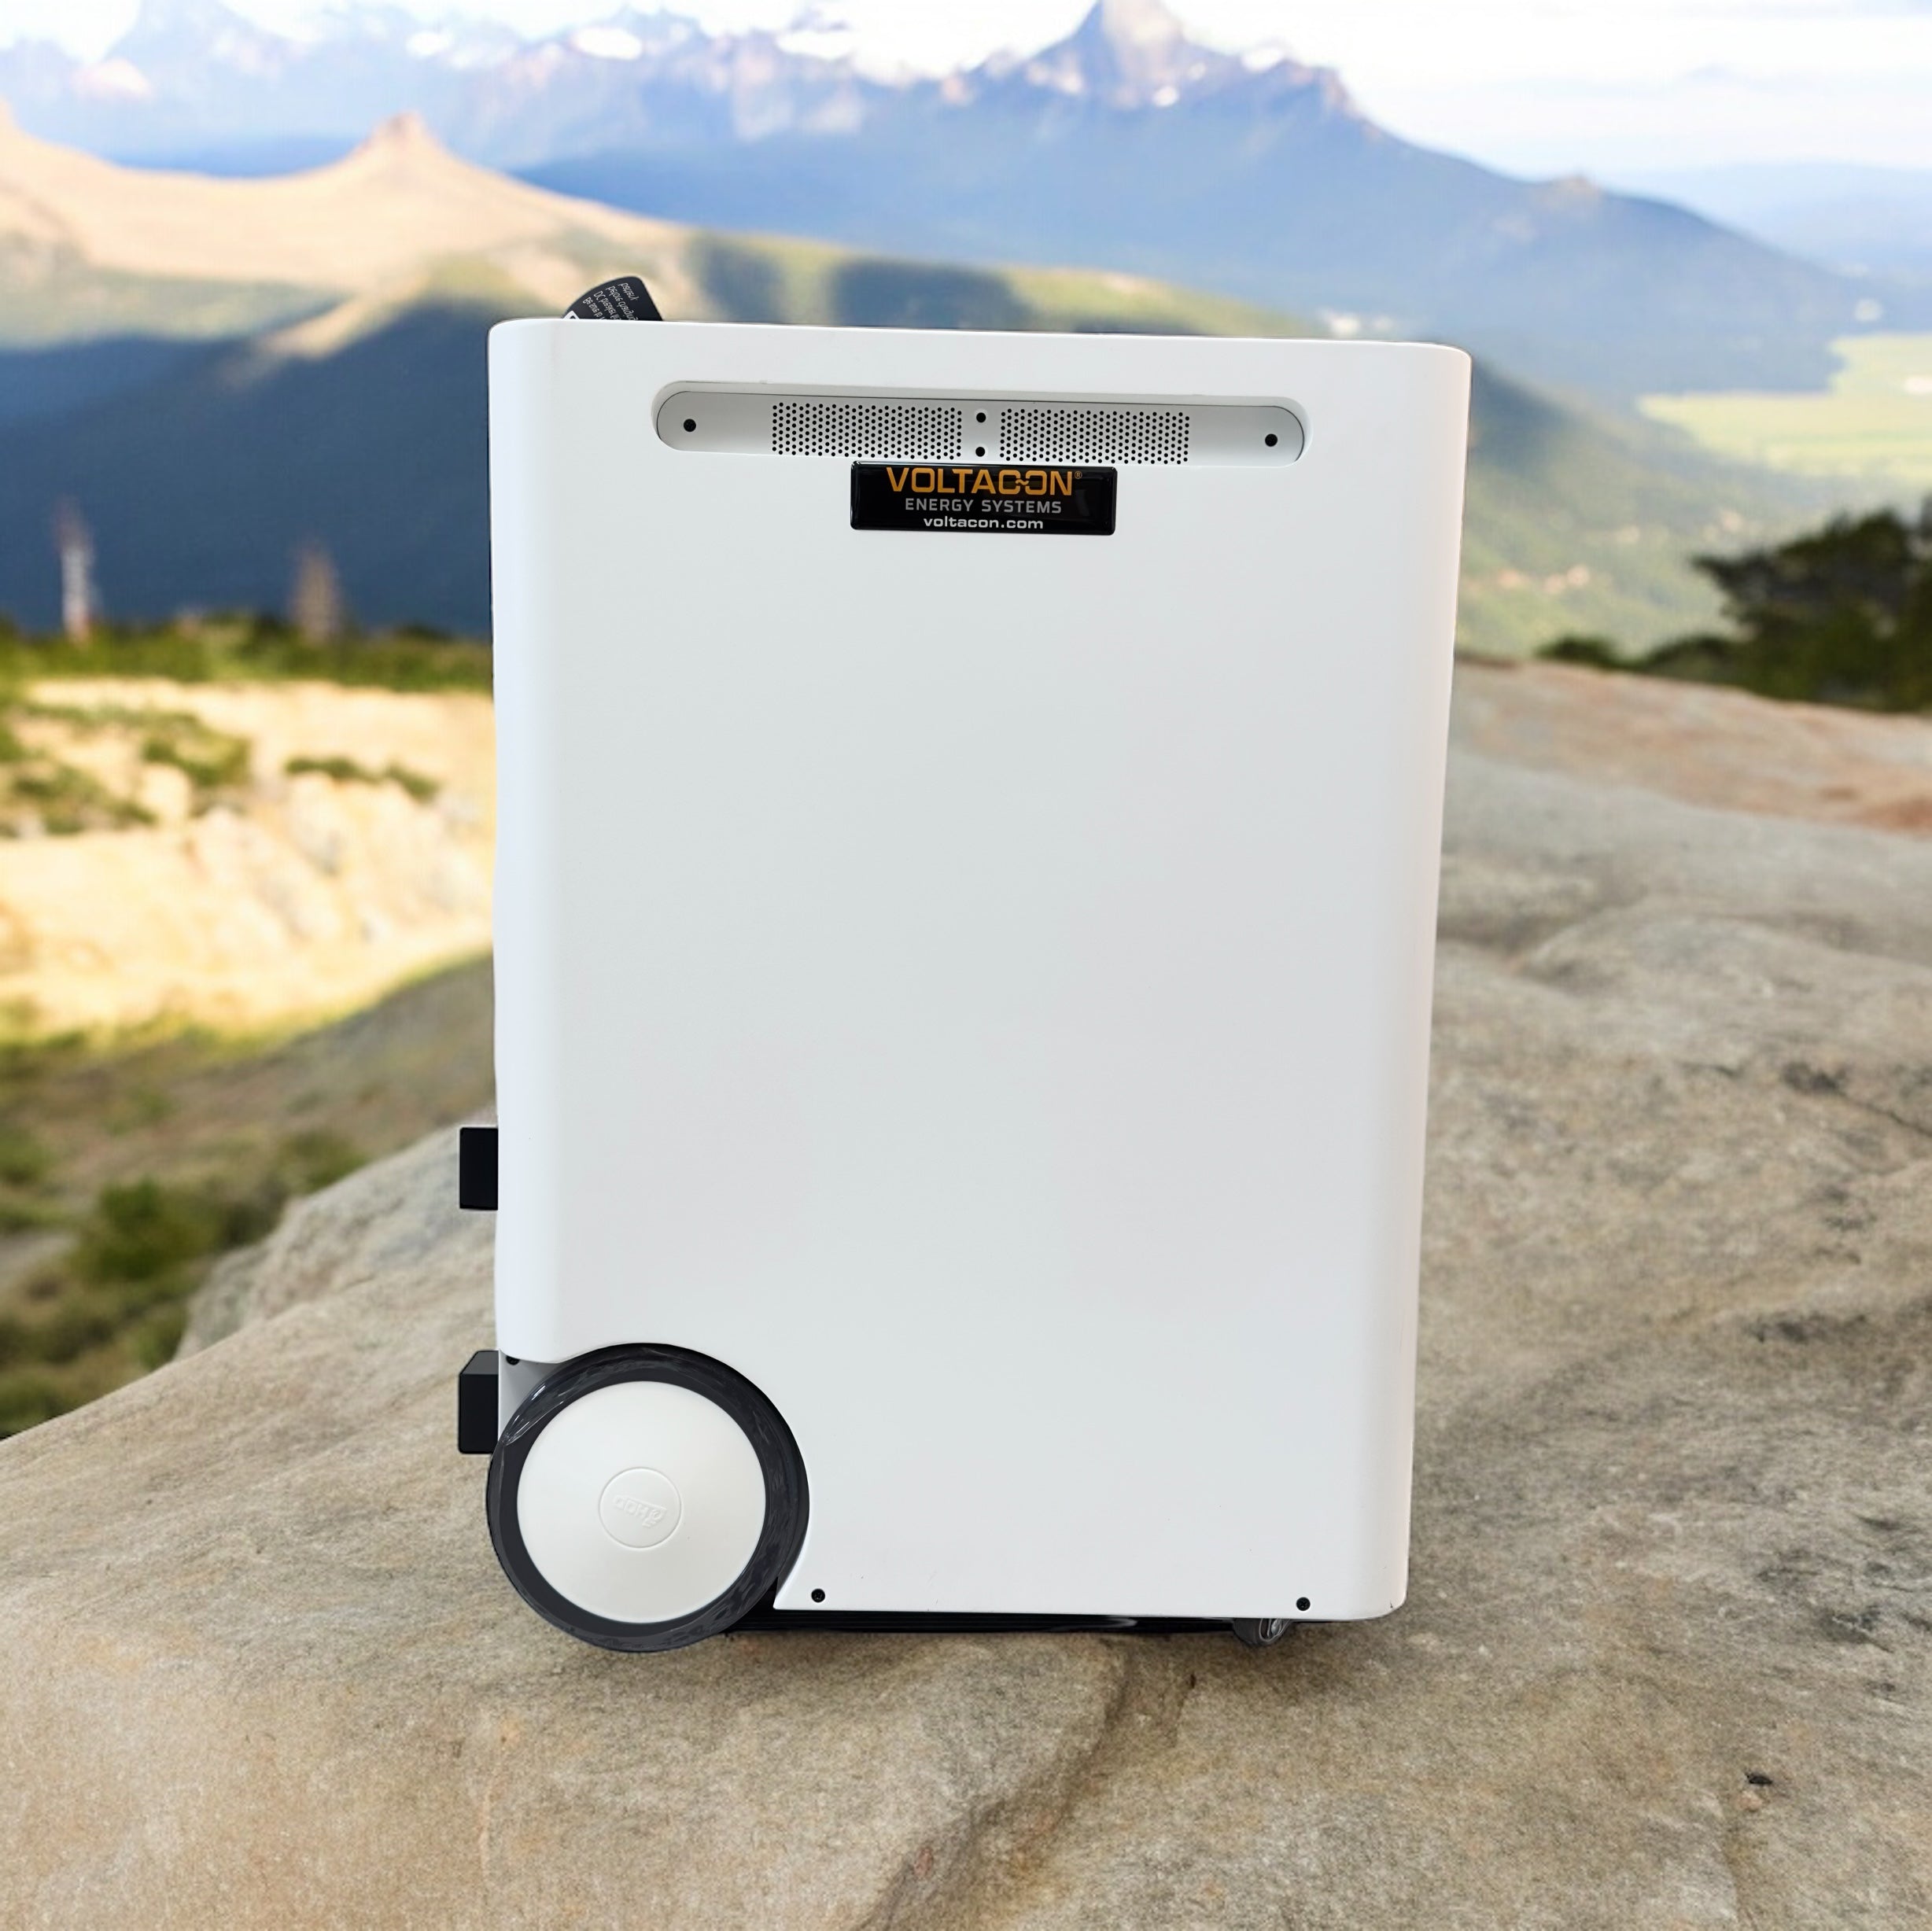 Portable Energy Storage 3kW Inverter With Built In Lithium Battery 2.5kWh - Expandable